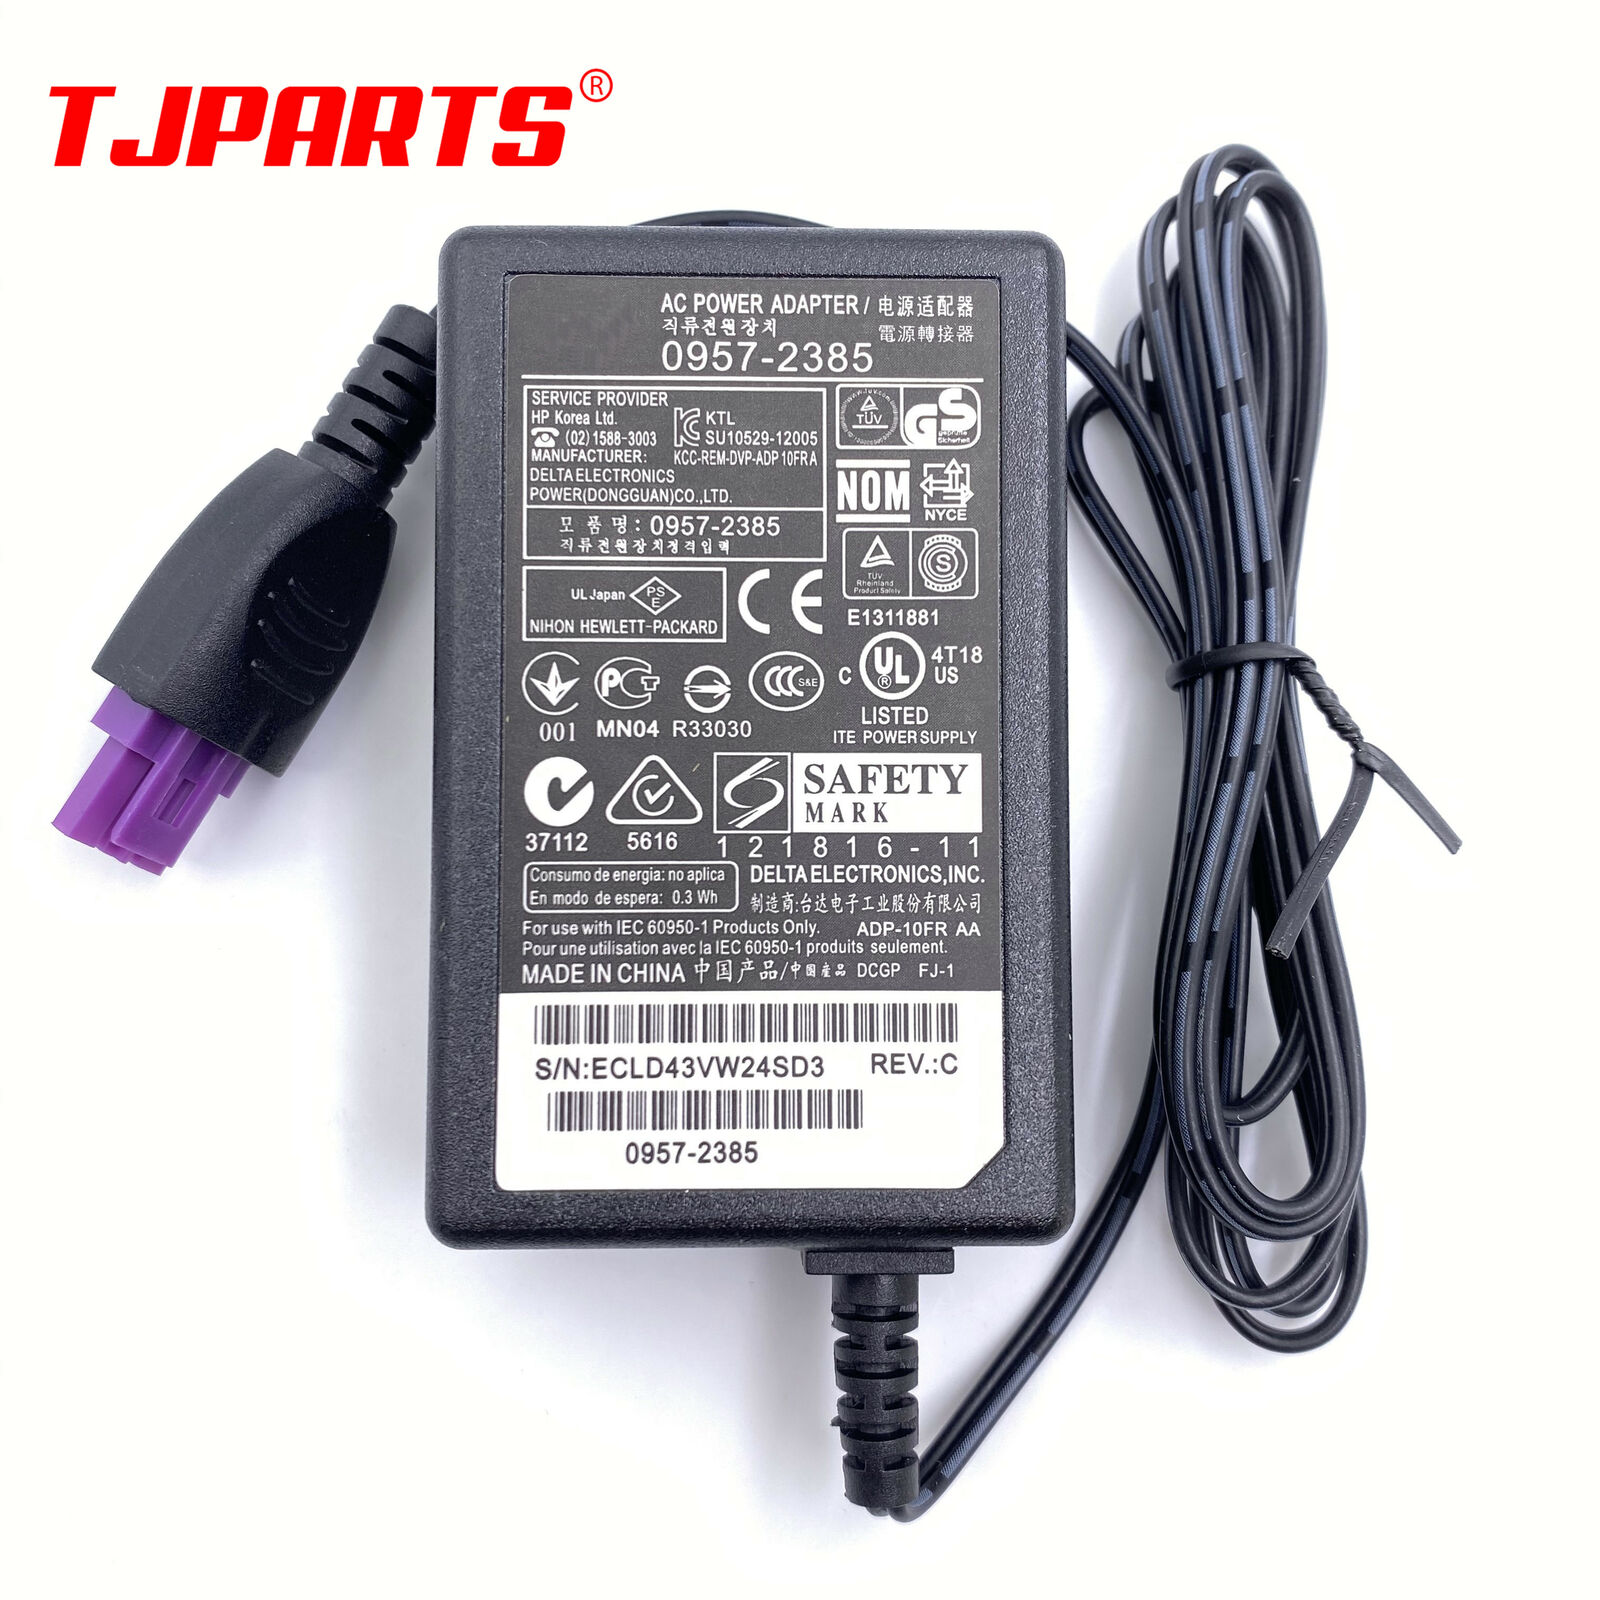 0957-2385 AC Adapter Charger Power Supply 22V 455mA for HP 1010 1012 1510 1512 Compatible Brand: For HP Item: AC Adap - Click Image to Close